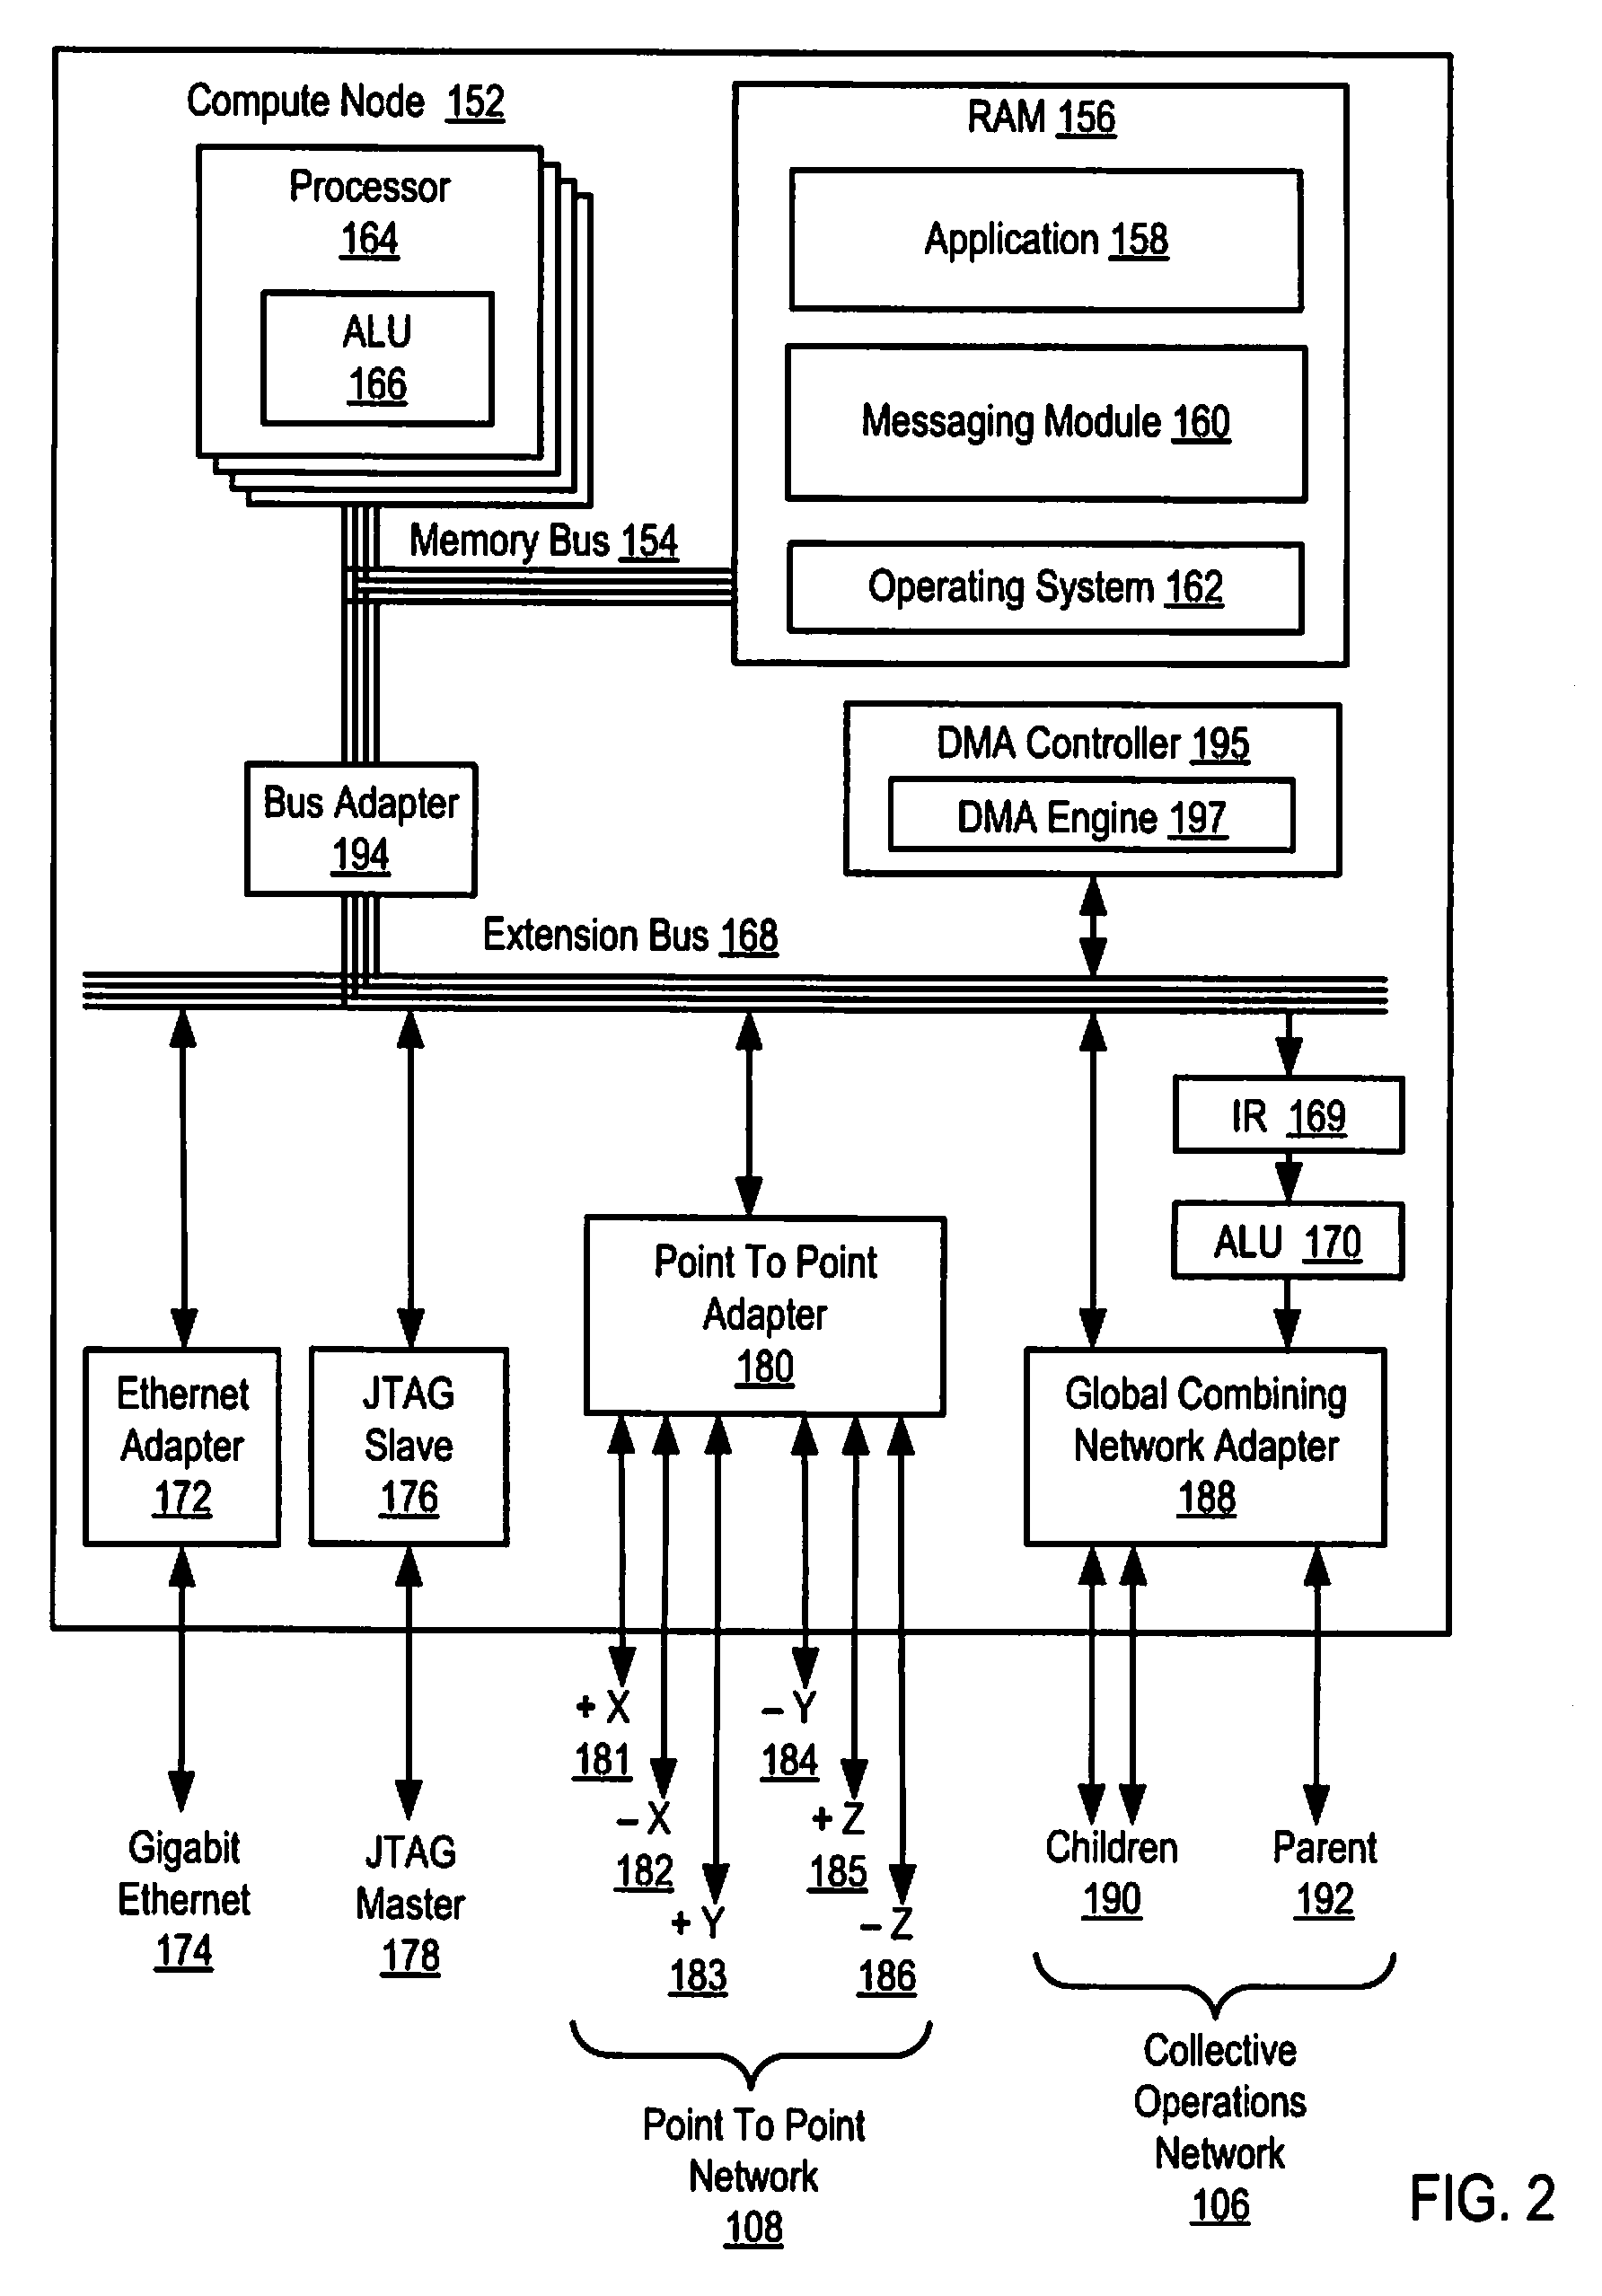 Signaling Completion of a Message Transfer from an Origin Compute Node to a Target Compute Node